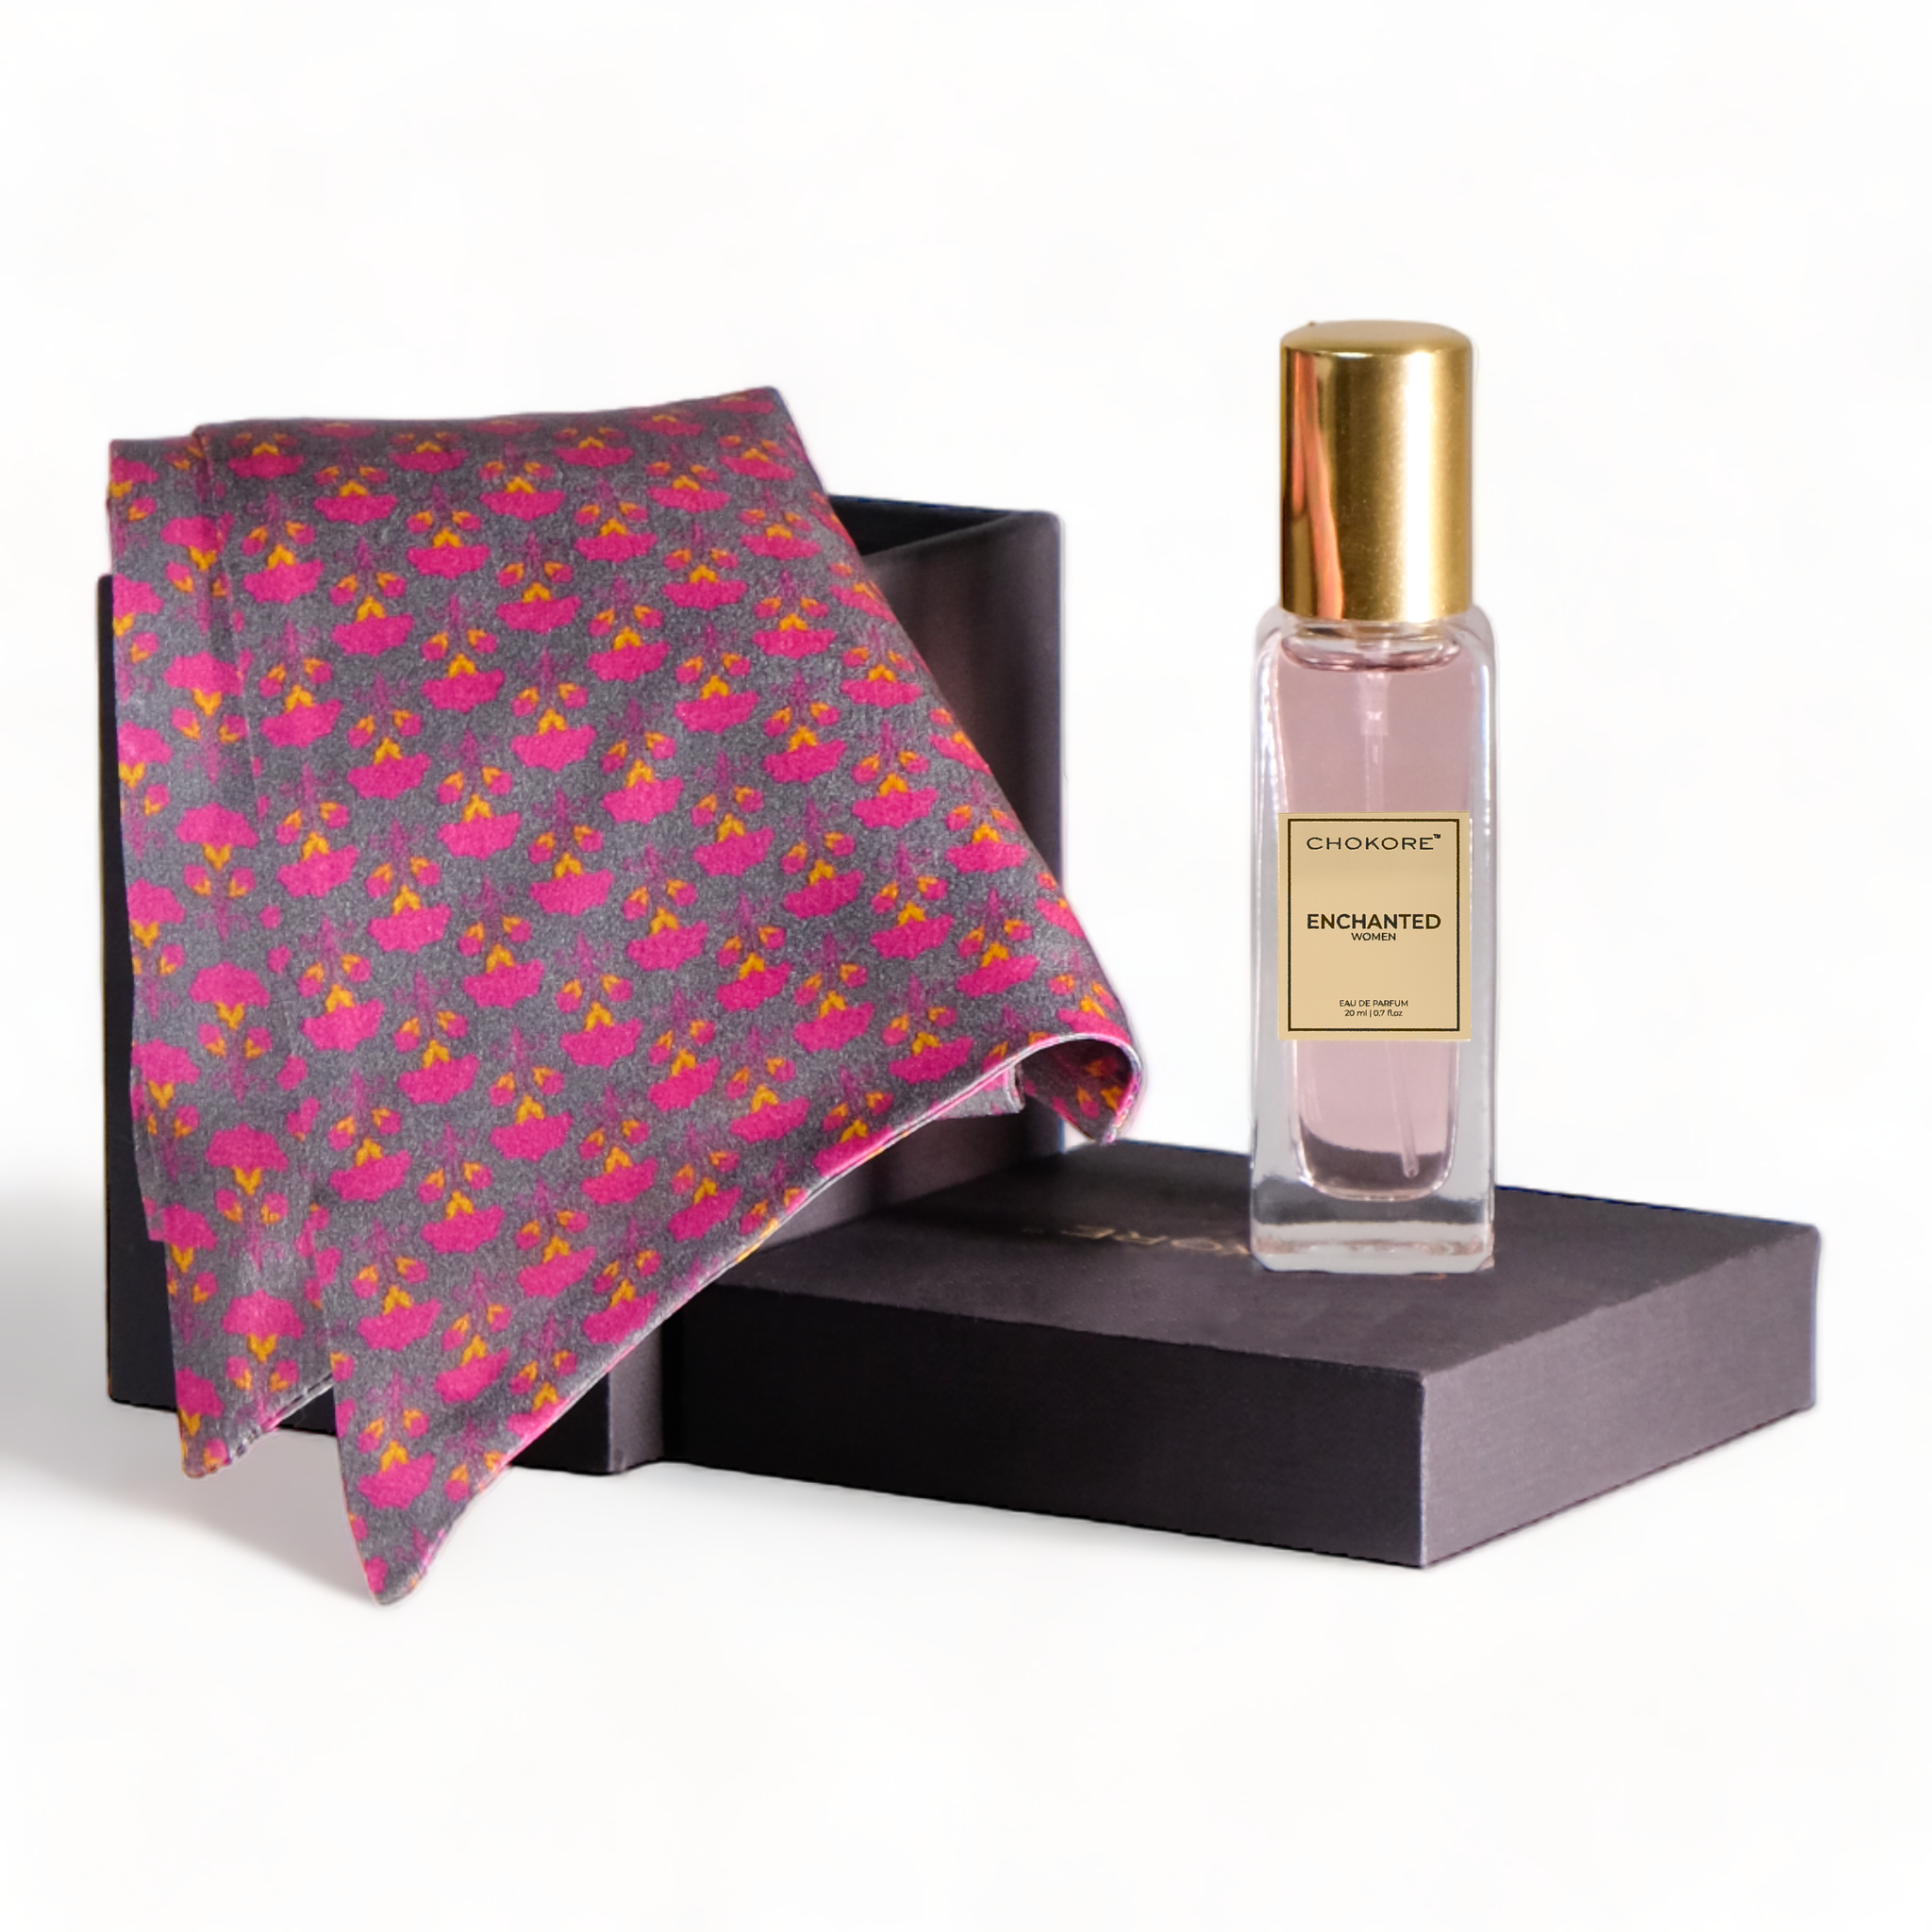 Chokore Special 2-in-1 Gift Set for Chokore Special 2-in-1 Gift Set for Her(Pink and Purple Silk Scarf & 20 ml Enchanted Perfume)Her (Printed Stole & 20 ml Scandalous Perfume)